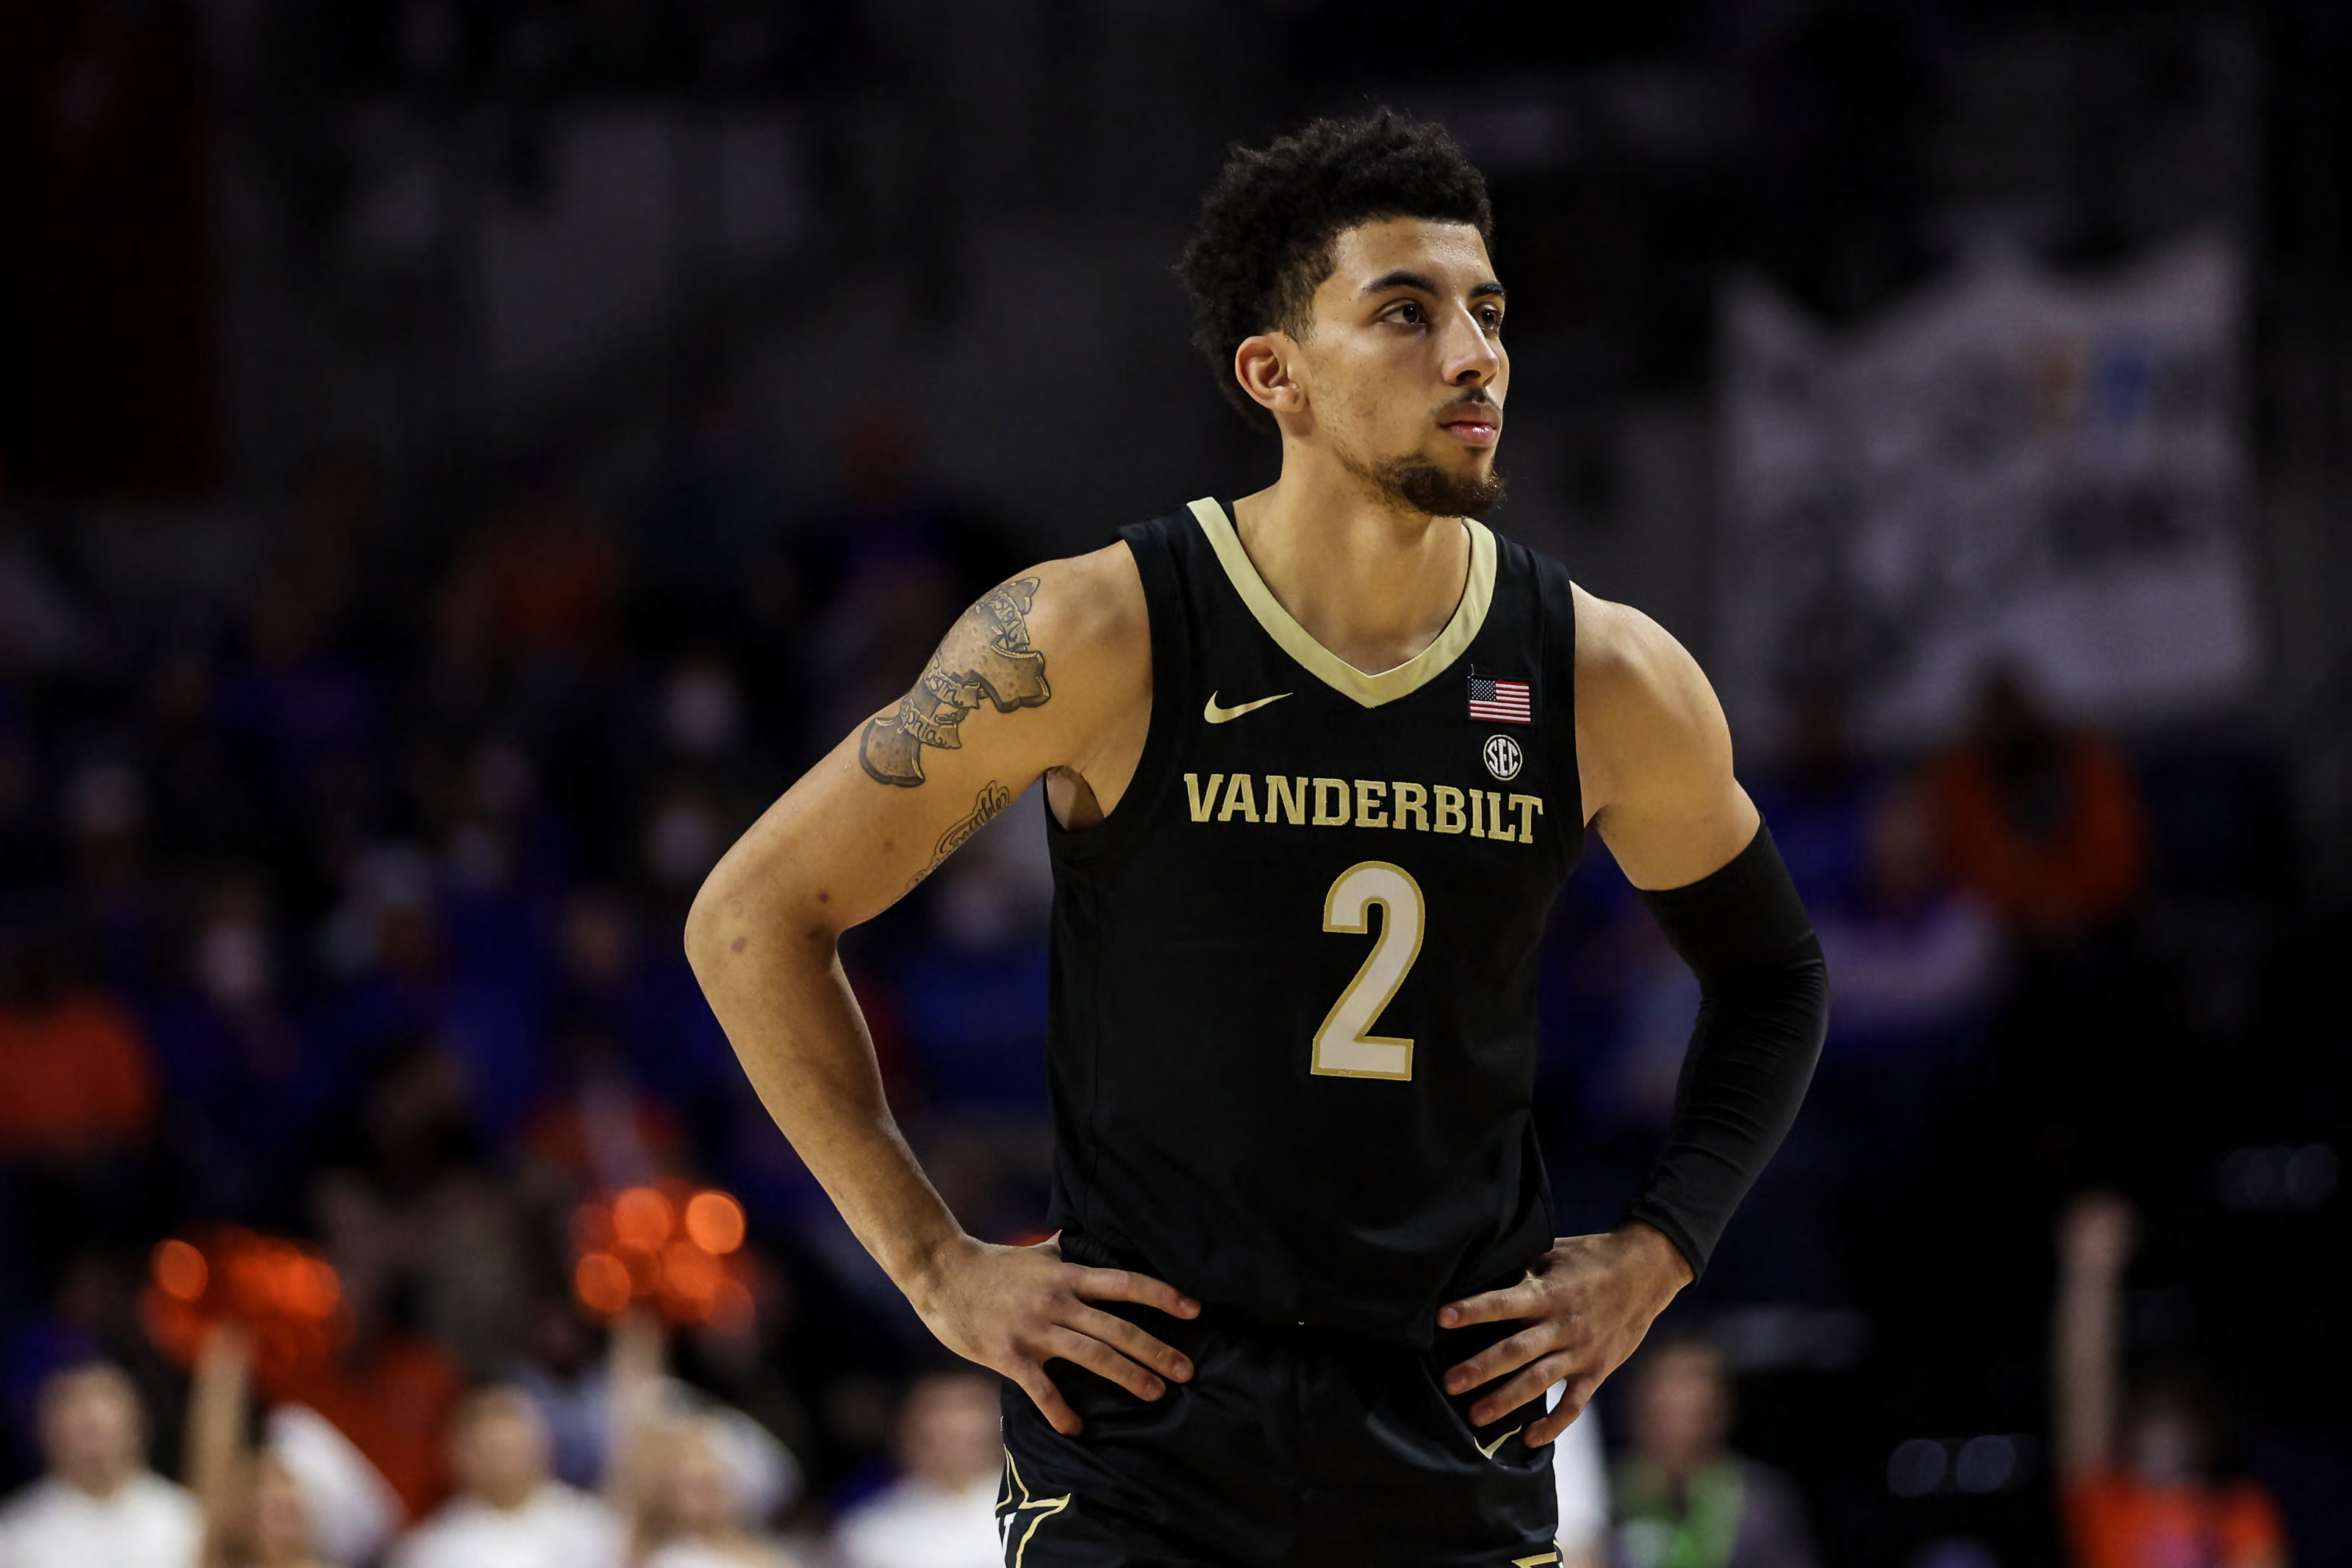 2022 NBA Draft: Will Scotty Pippen Jr. get drafted?